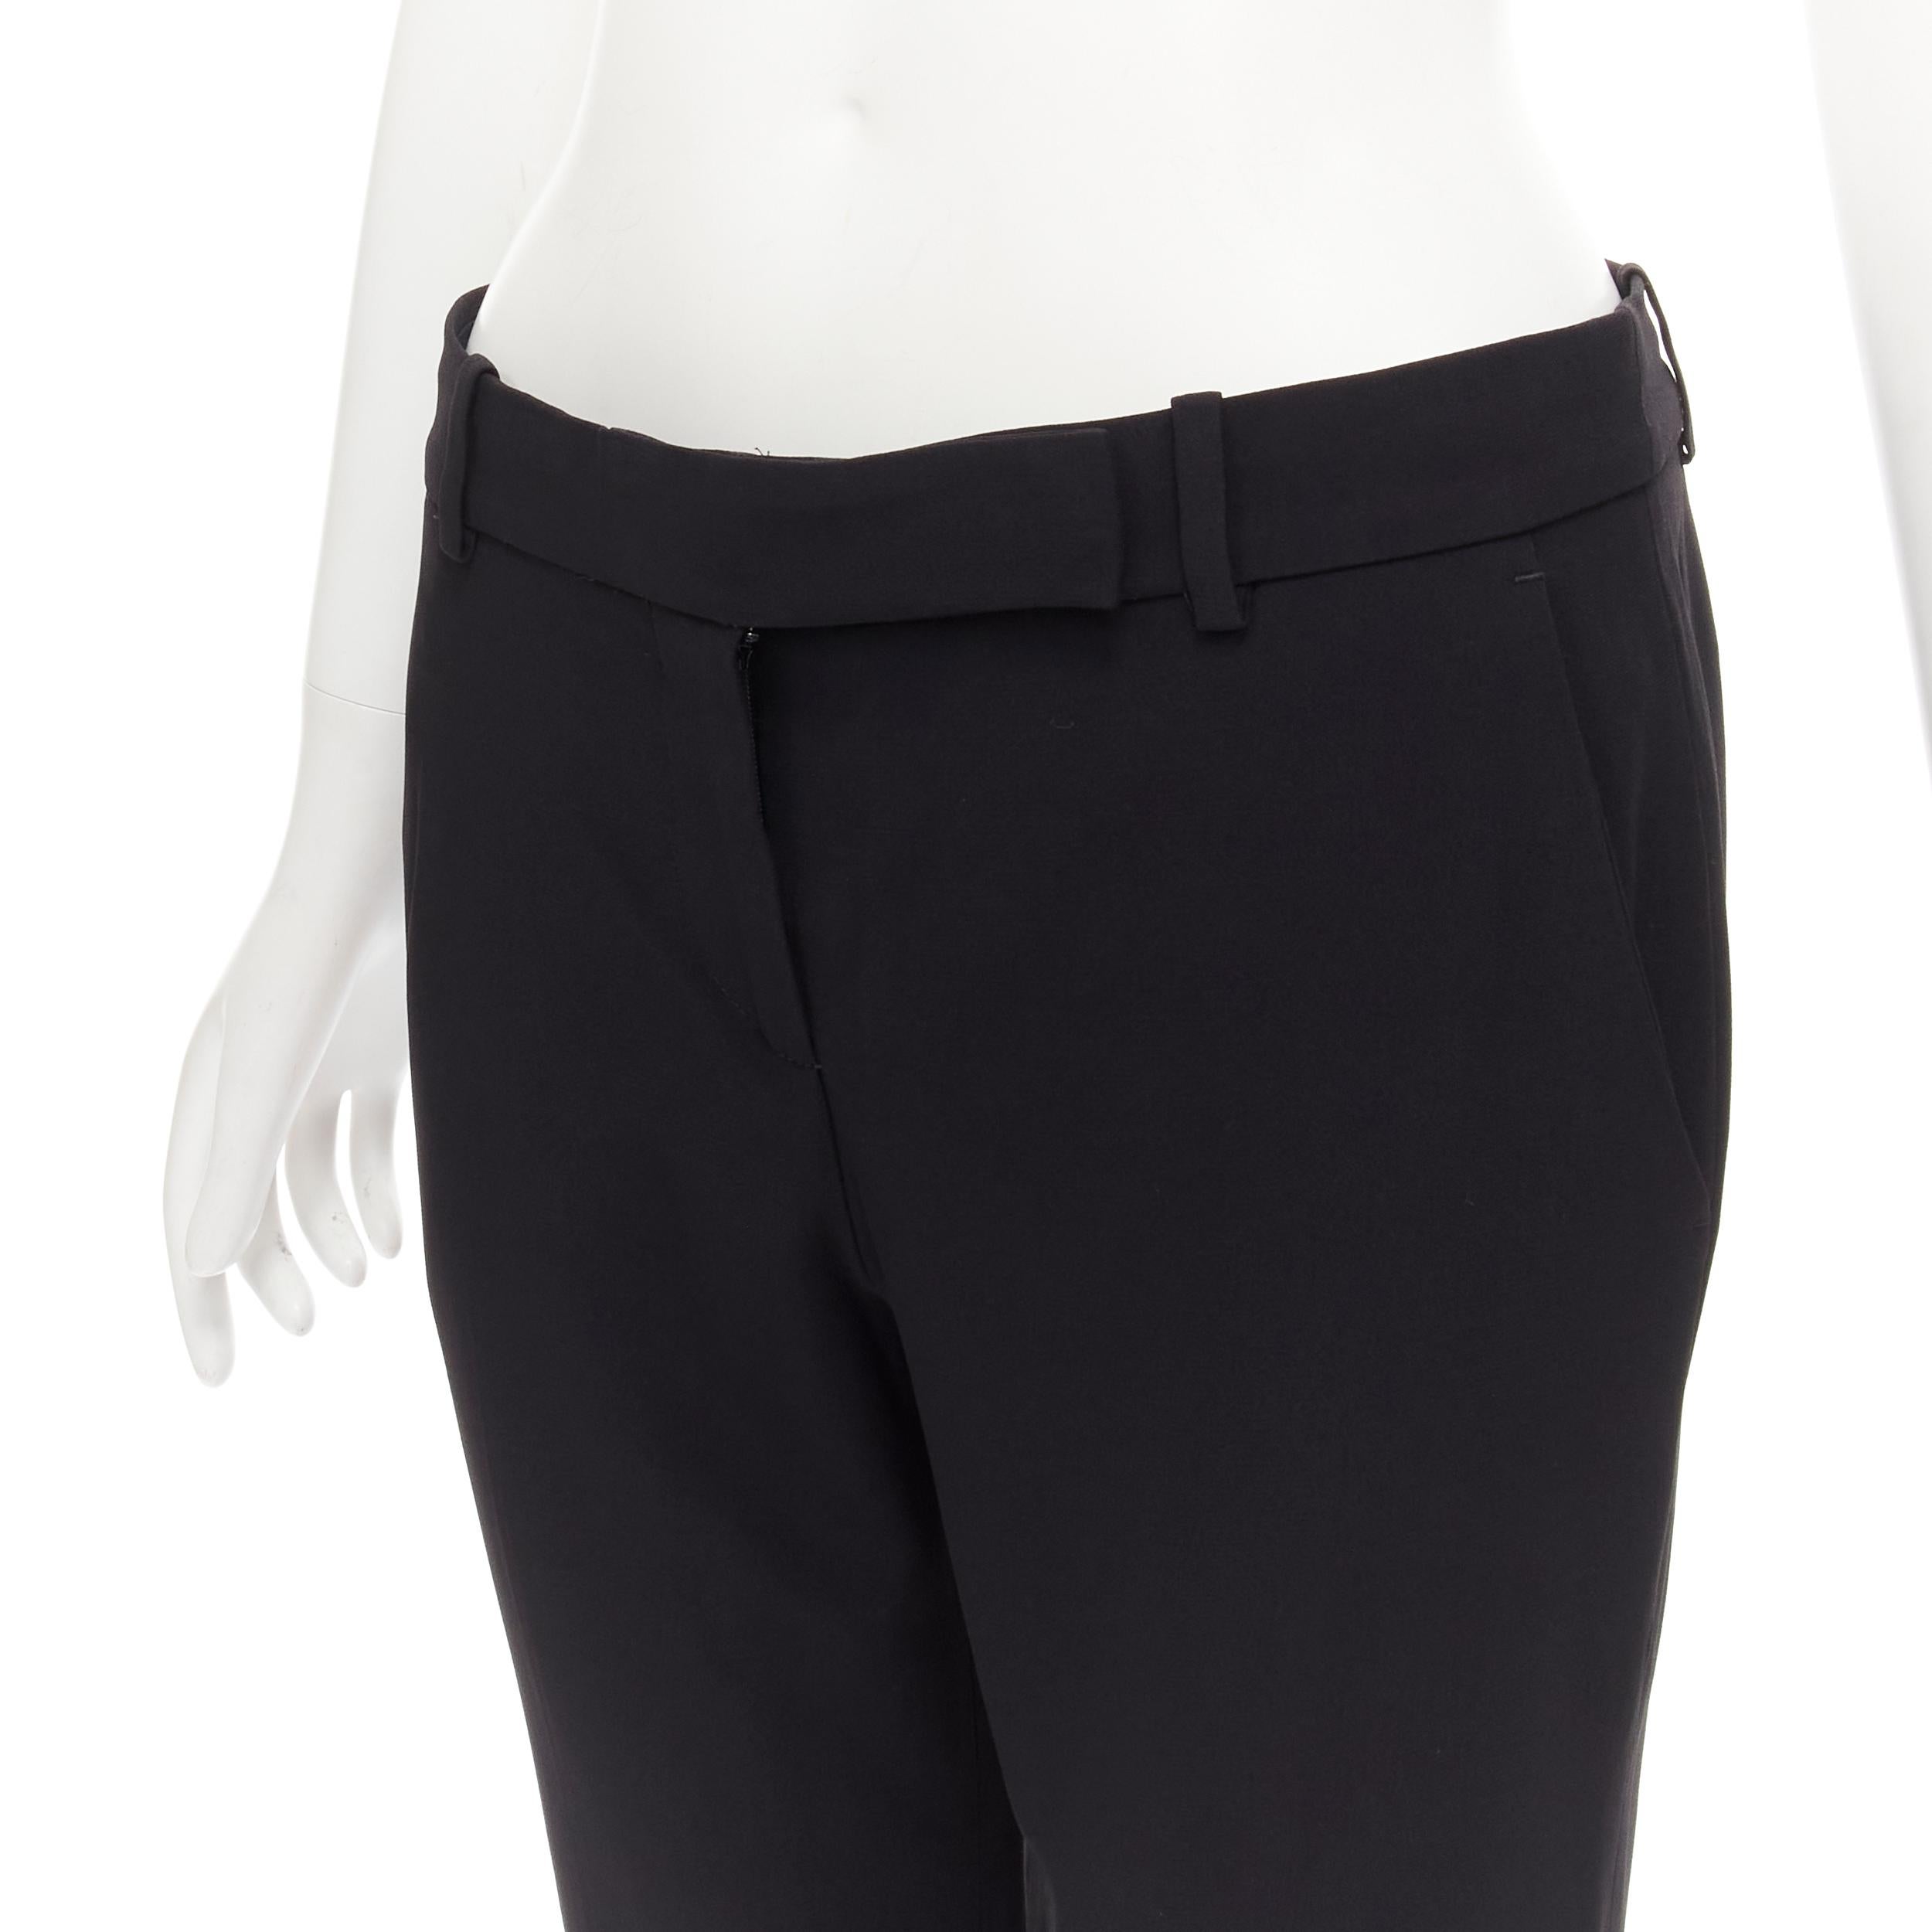 ALEXANDER MCQUEEN black acetate rayon bell flared crop trousers IT40 S
Reference: KEDG/A00110
Brand: Alexander McQueen
Designer: Sarah Burton
Material: Acetate, Rayon
Color: Black
Pattern: Solid
Closure: Zip
Extra Details: 3-pocket.
Made in: